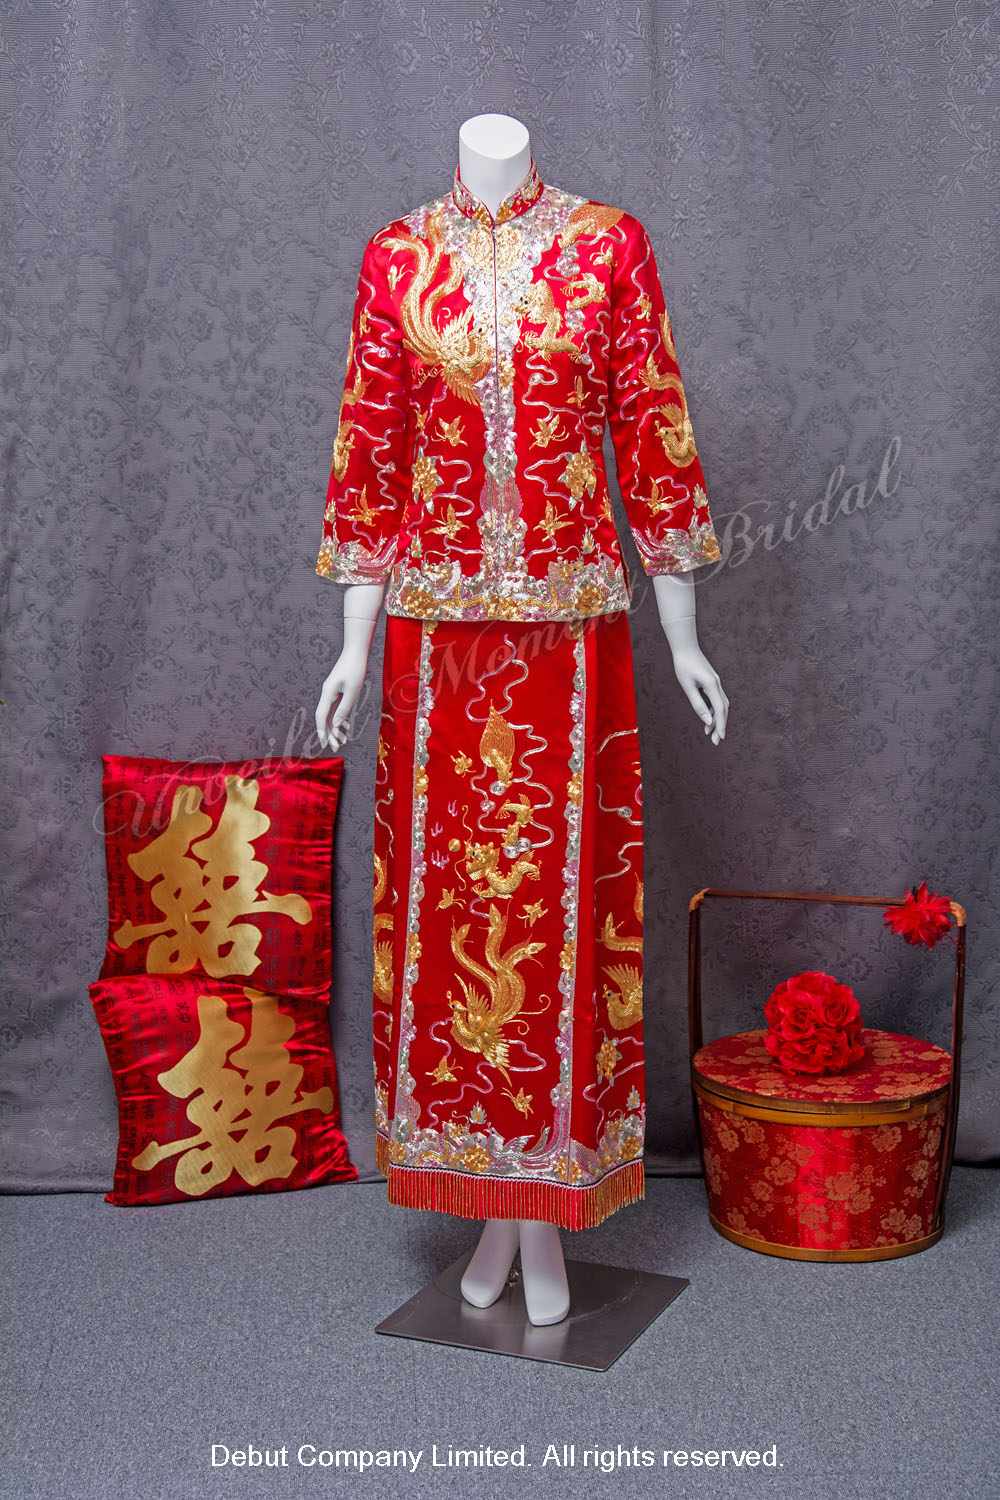 Large size traditional Chinese wedding gown with decorative dragon, phoenix and clouds embroideries 小五福中式裙褂, 龍鳳祥雲金銀線, 大碼裙褂